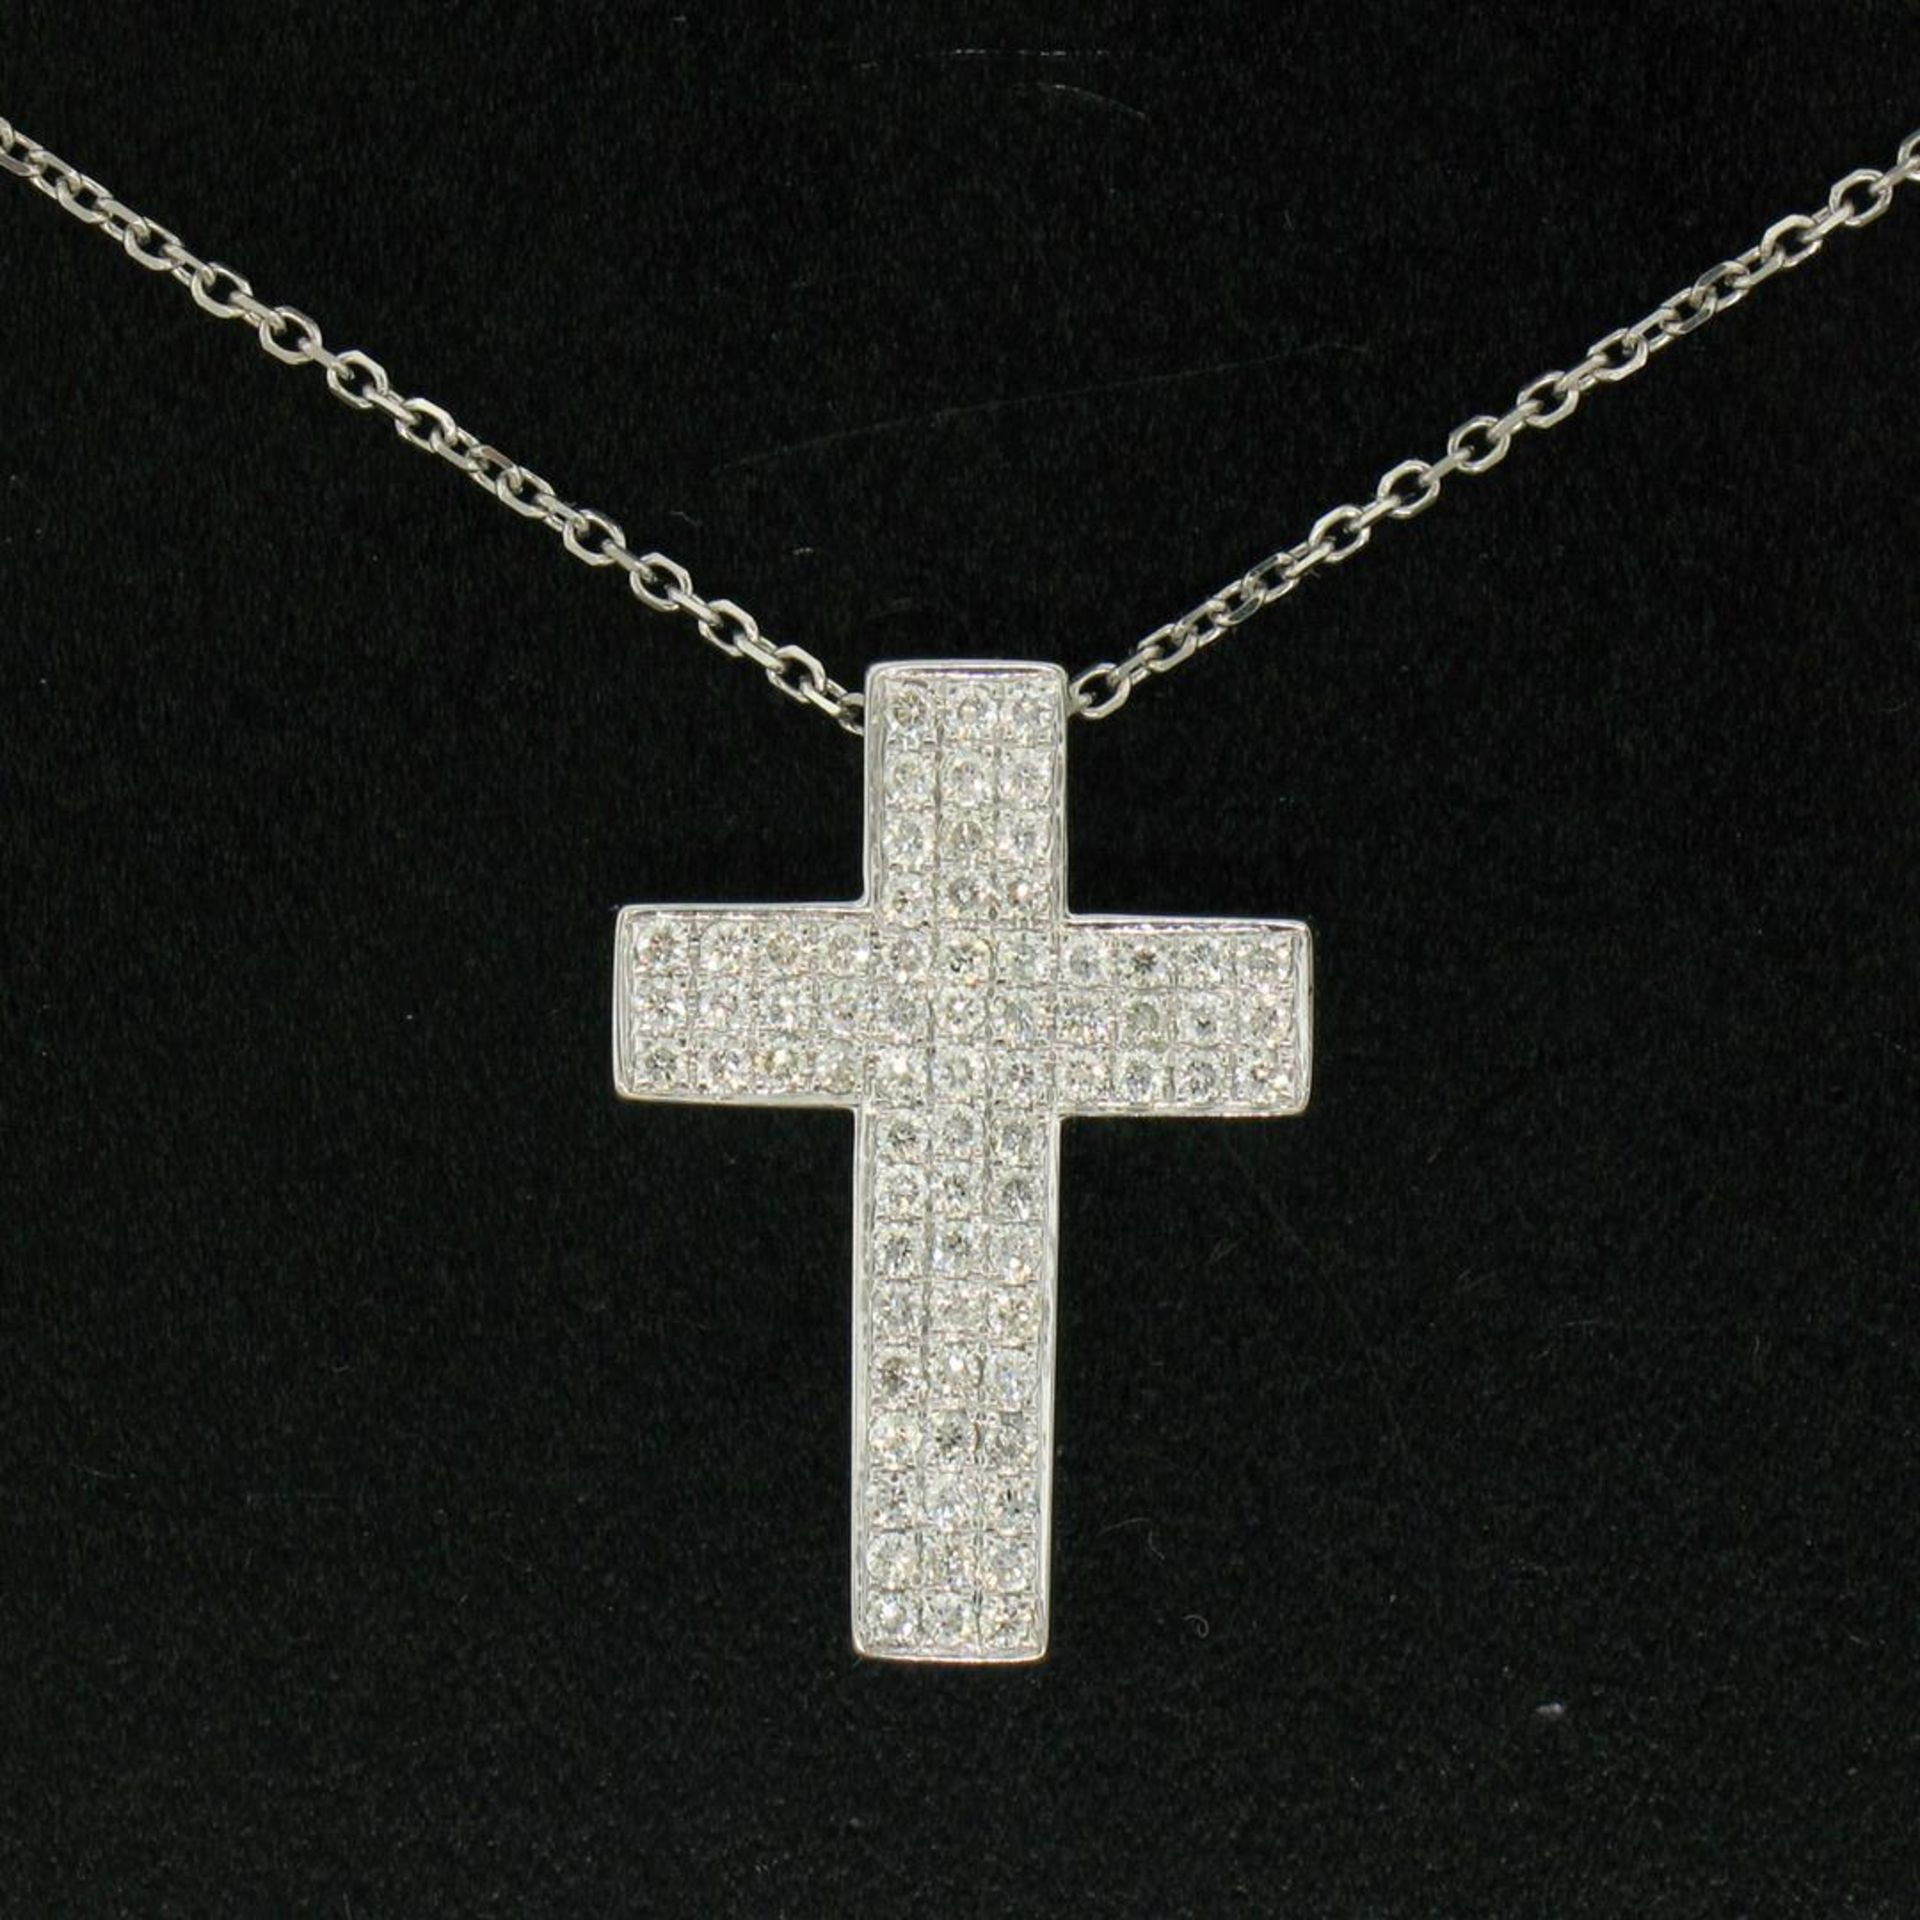 14K White Gold 0.51 ctw Micro Pave Diamond Cross Pendant w/ 18" Cable Link Chain - Image 7 of 8